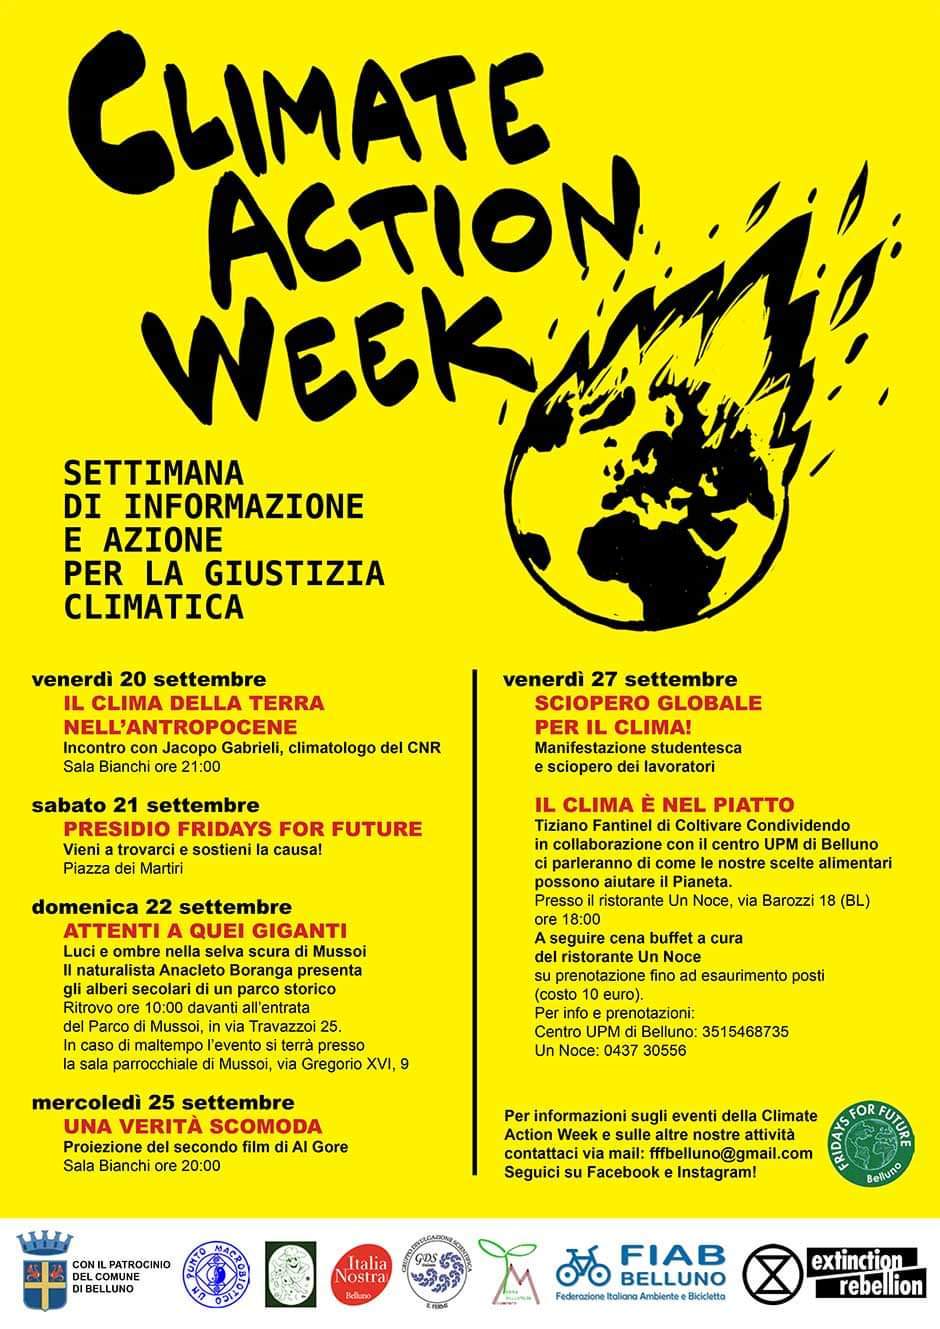 Climat action week